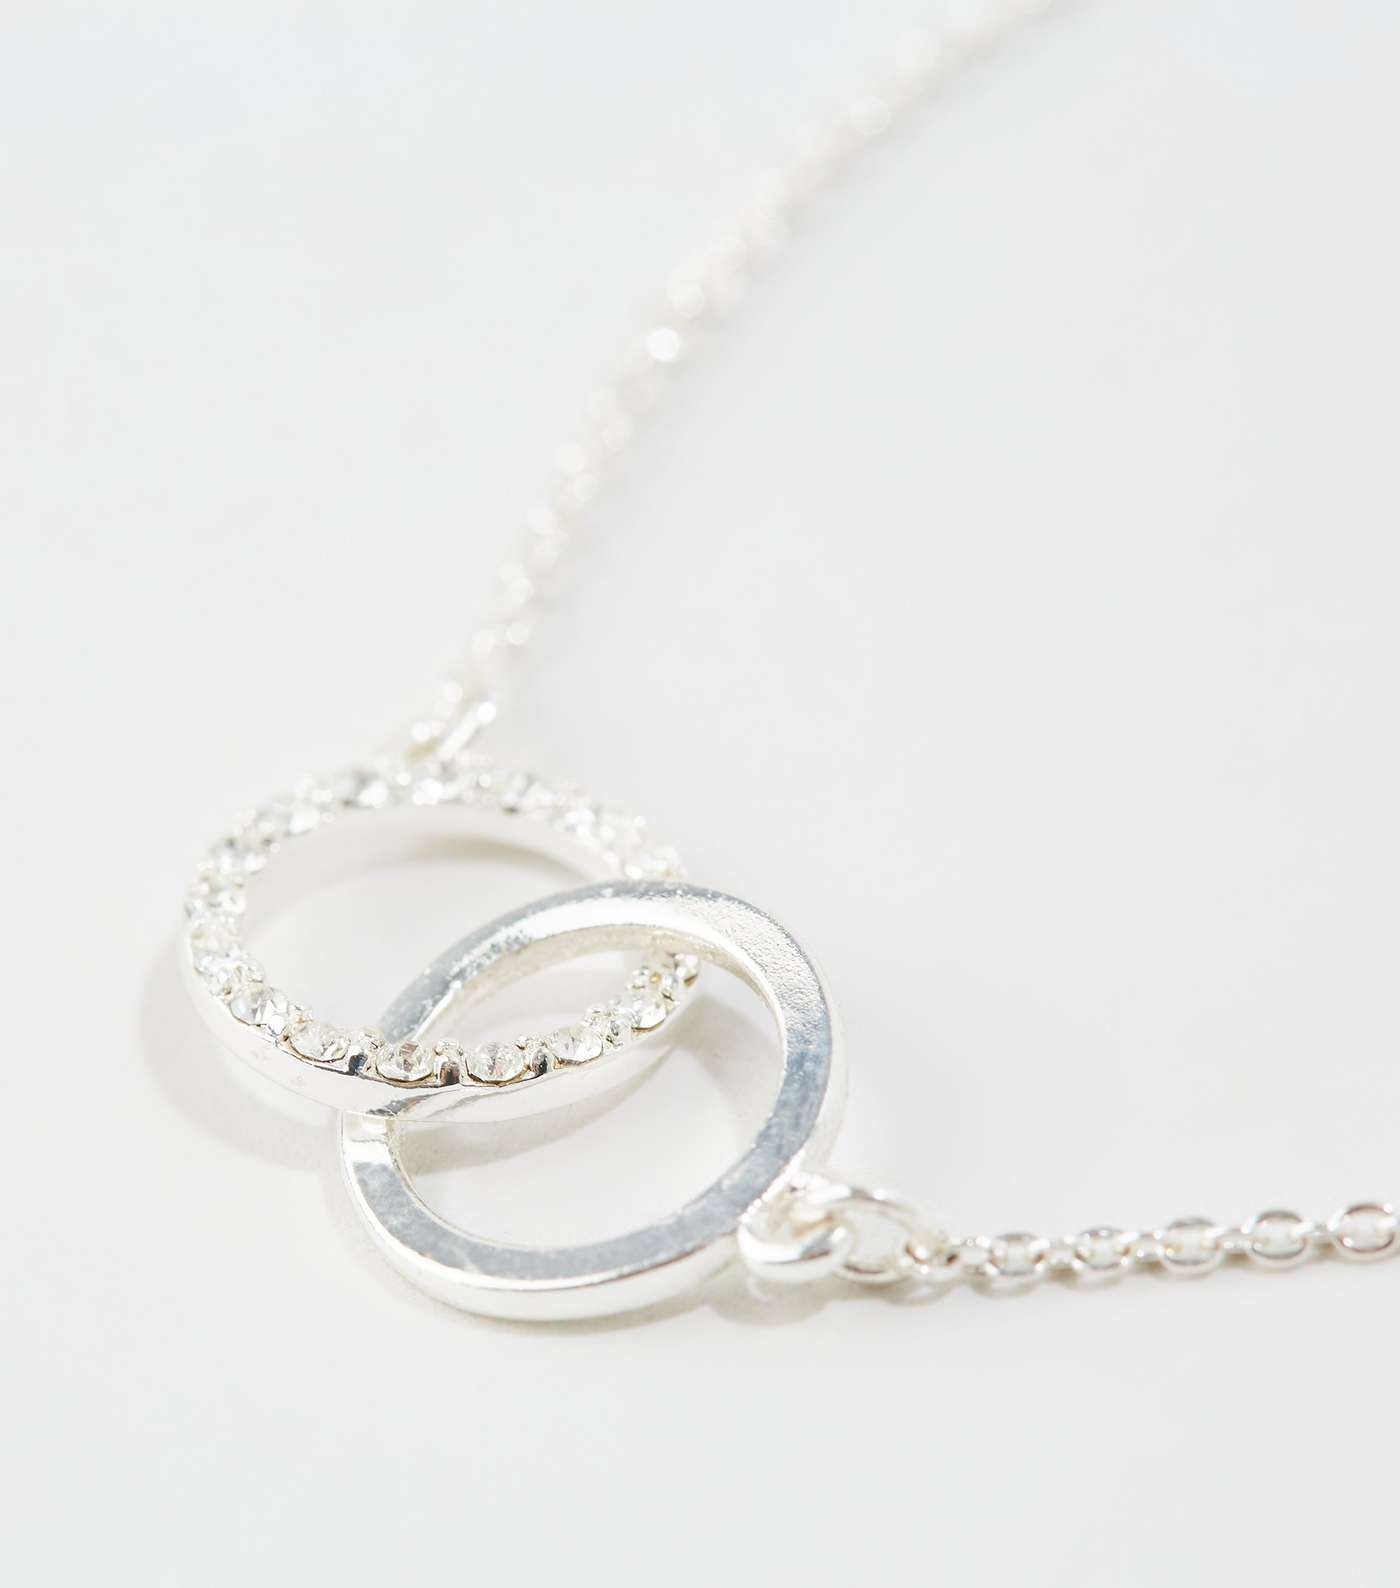 Silver Plated Circle Necklace with Crystals from Swarovski® Image 3